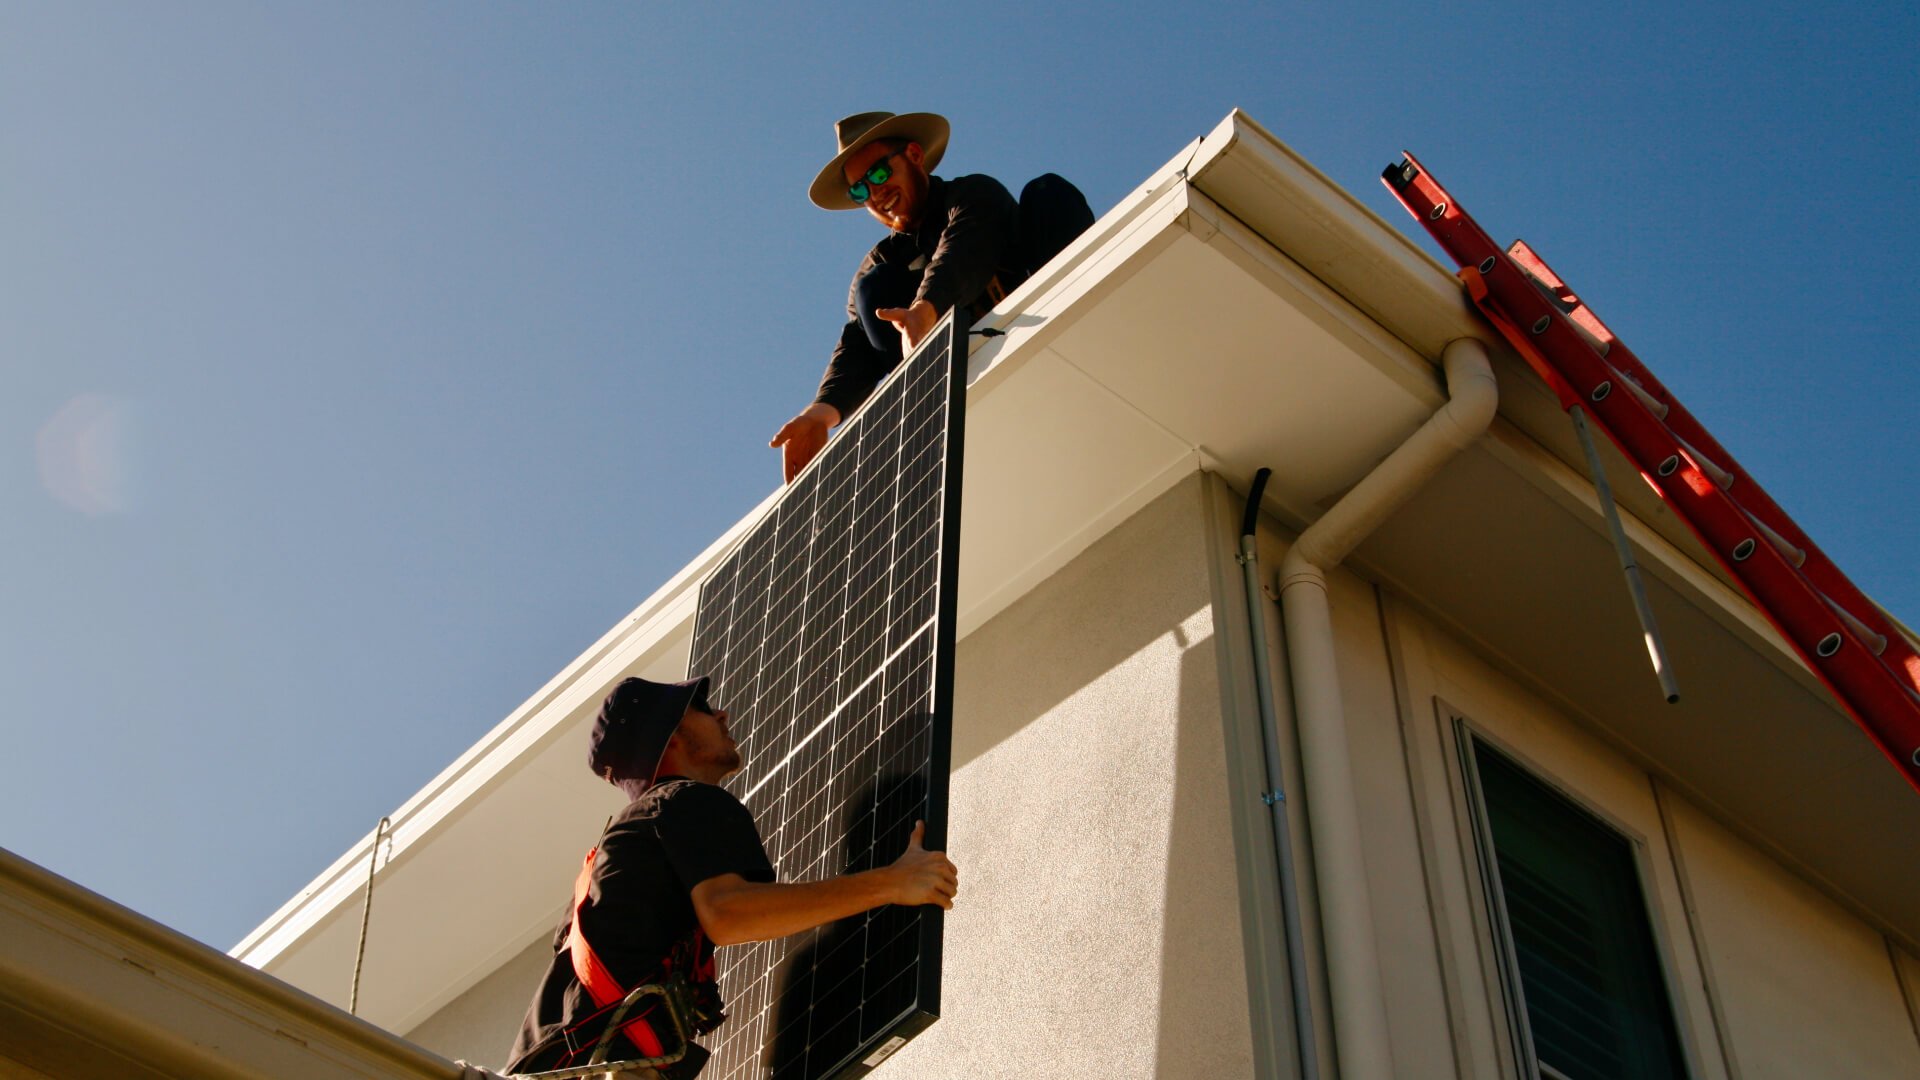 Two solar installers working on solar a installation on a roof of a Sunshine Coast house.